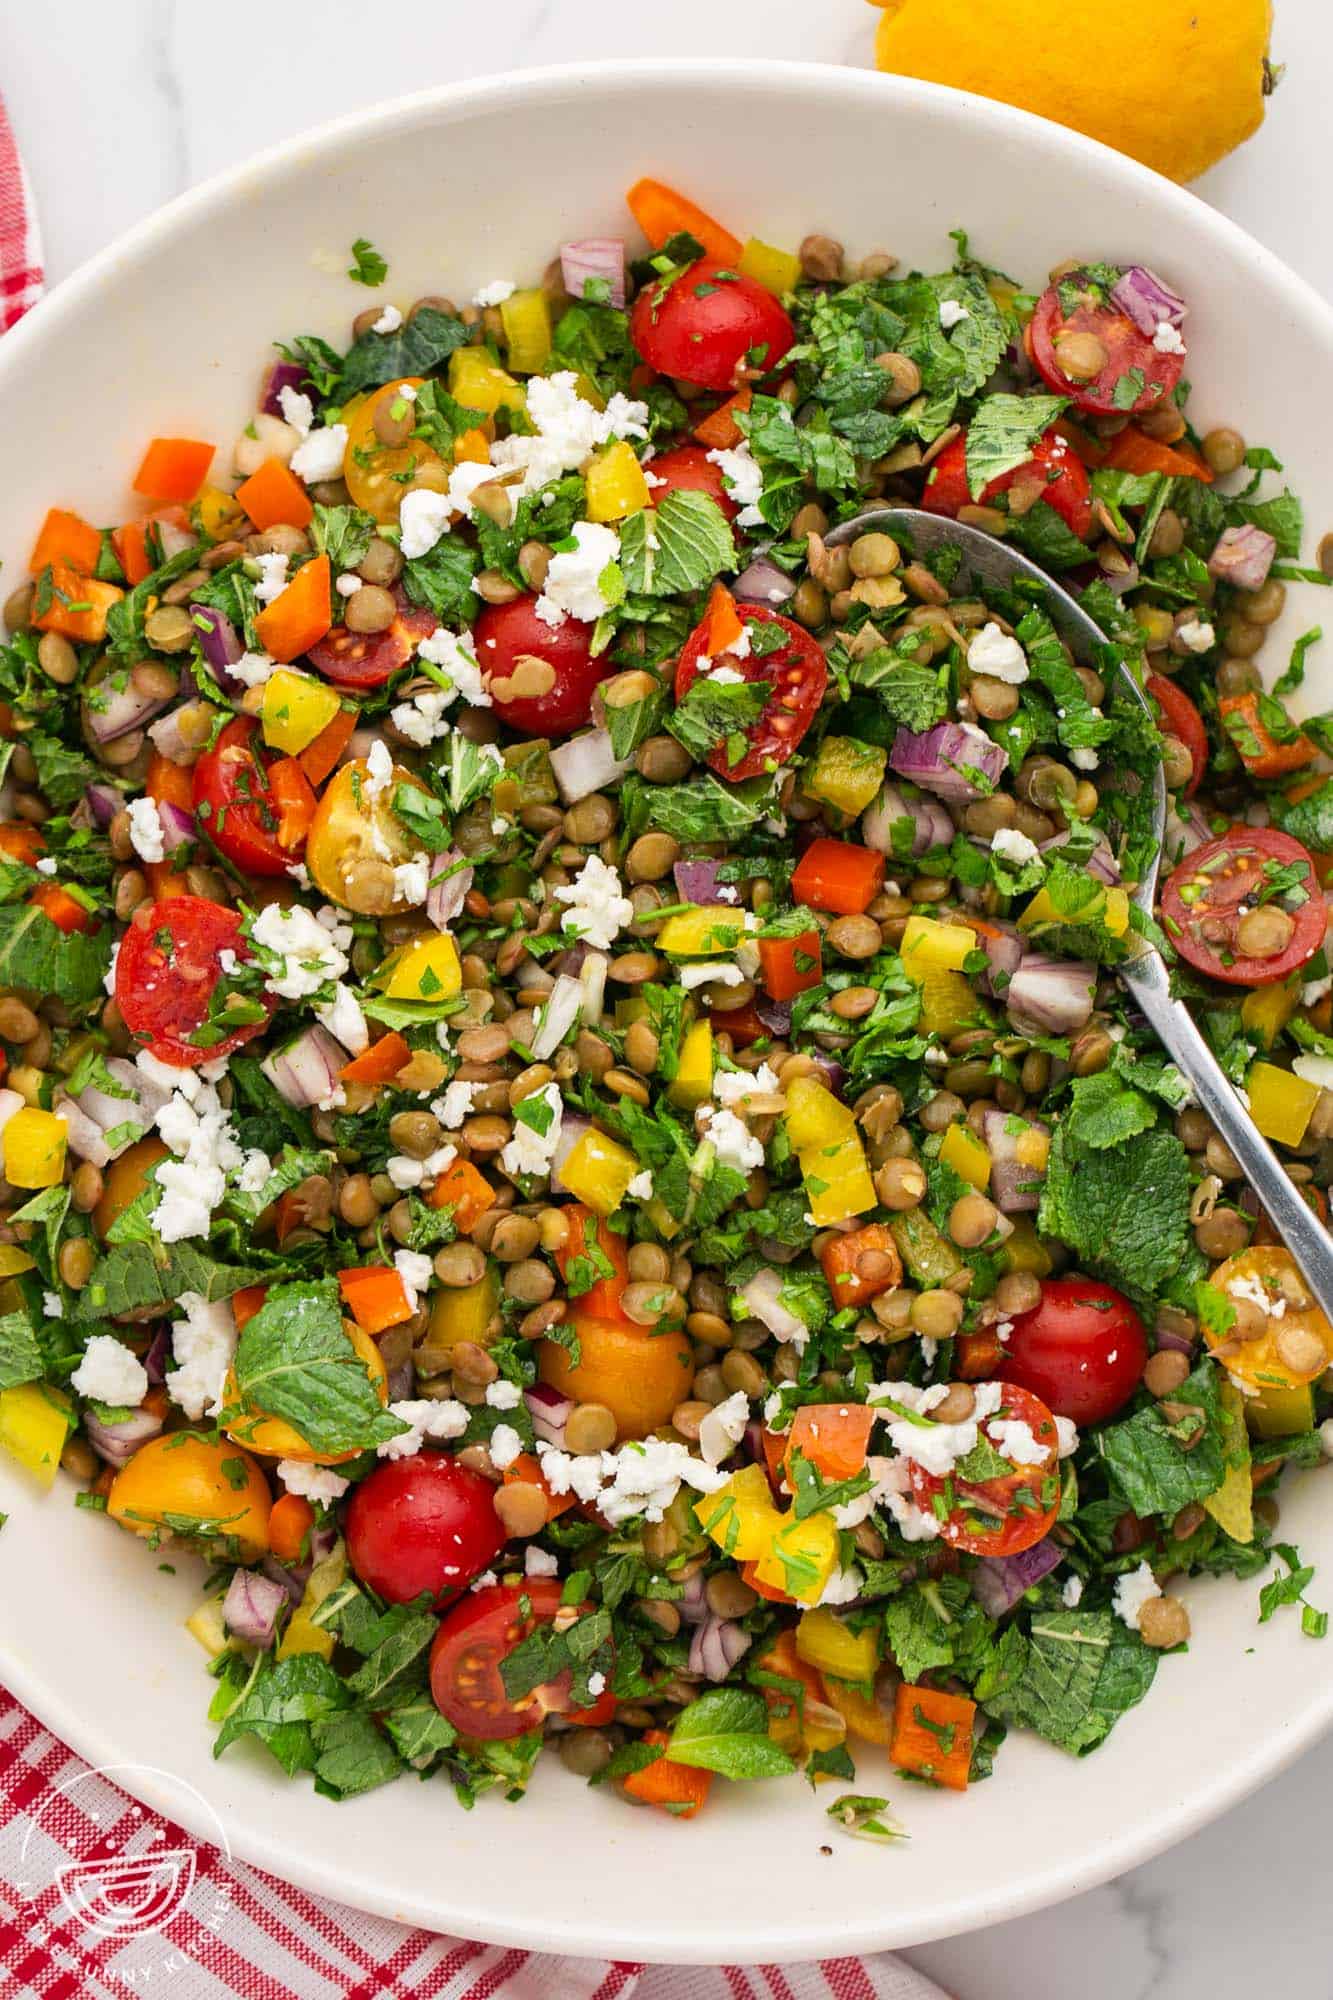 lentil salad with tomatoes, feta, herbs, in a bowl